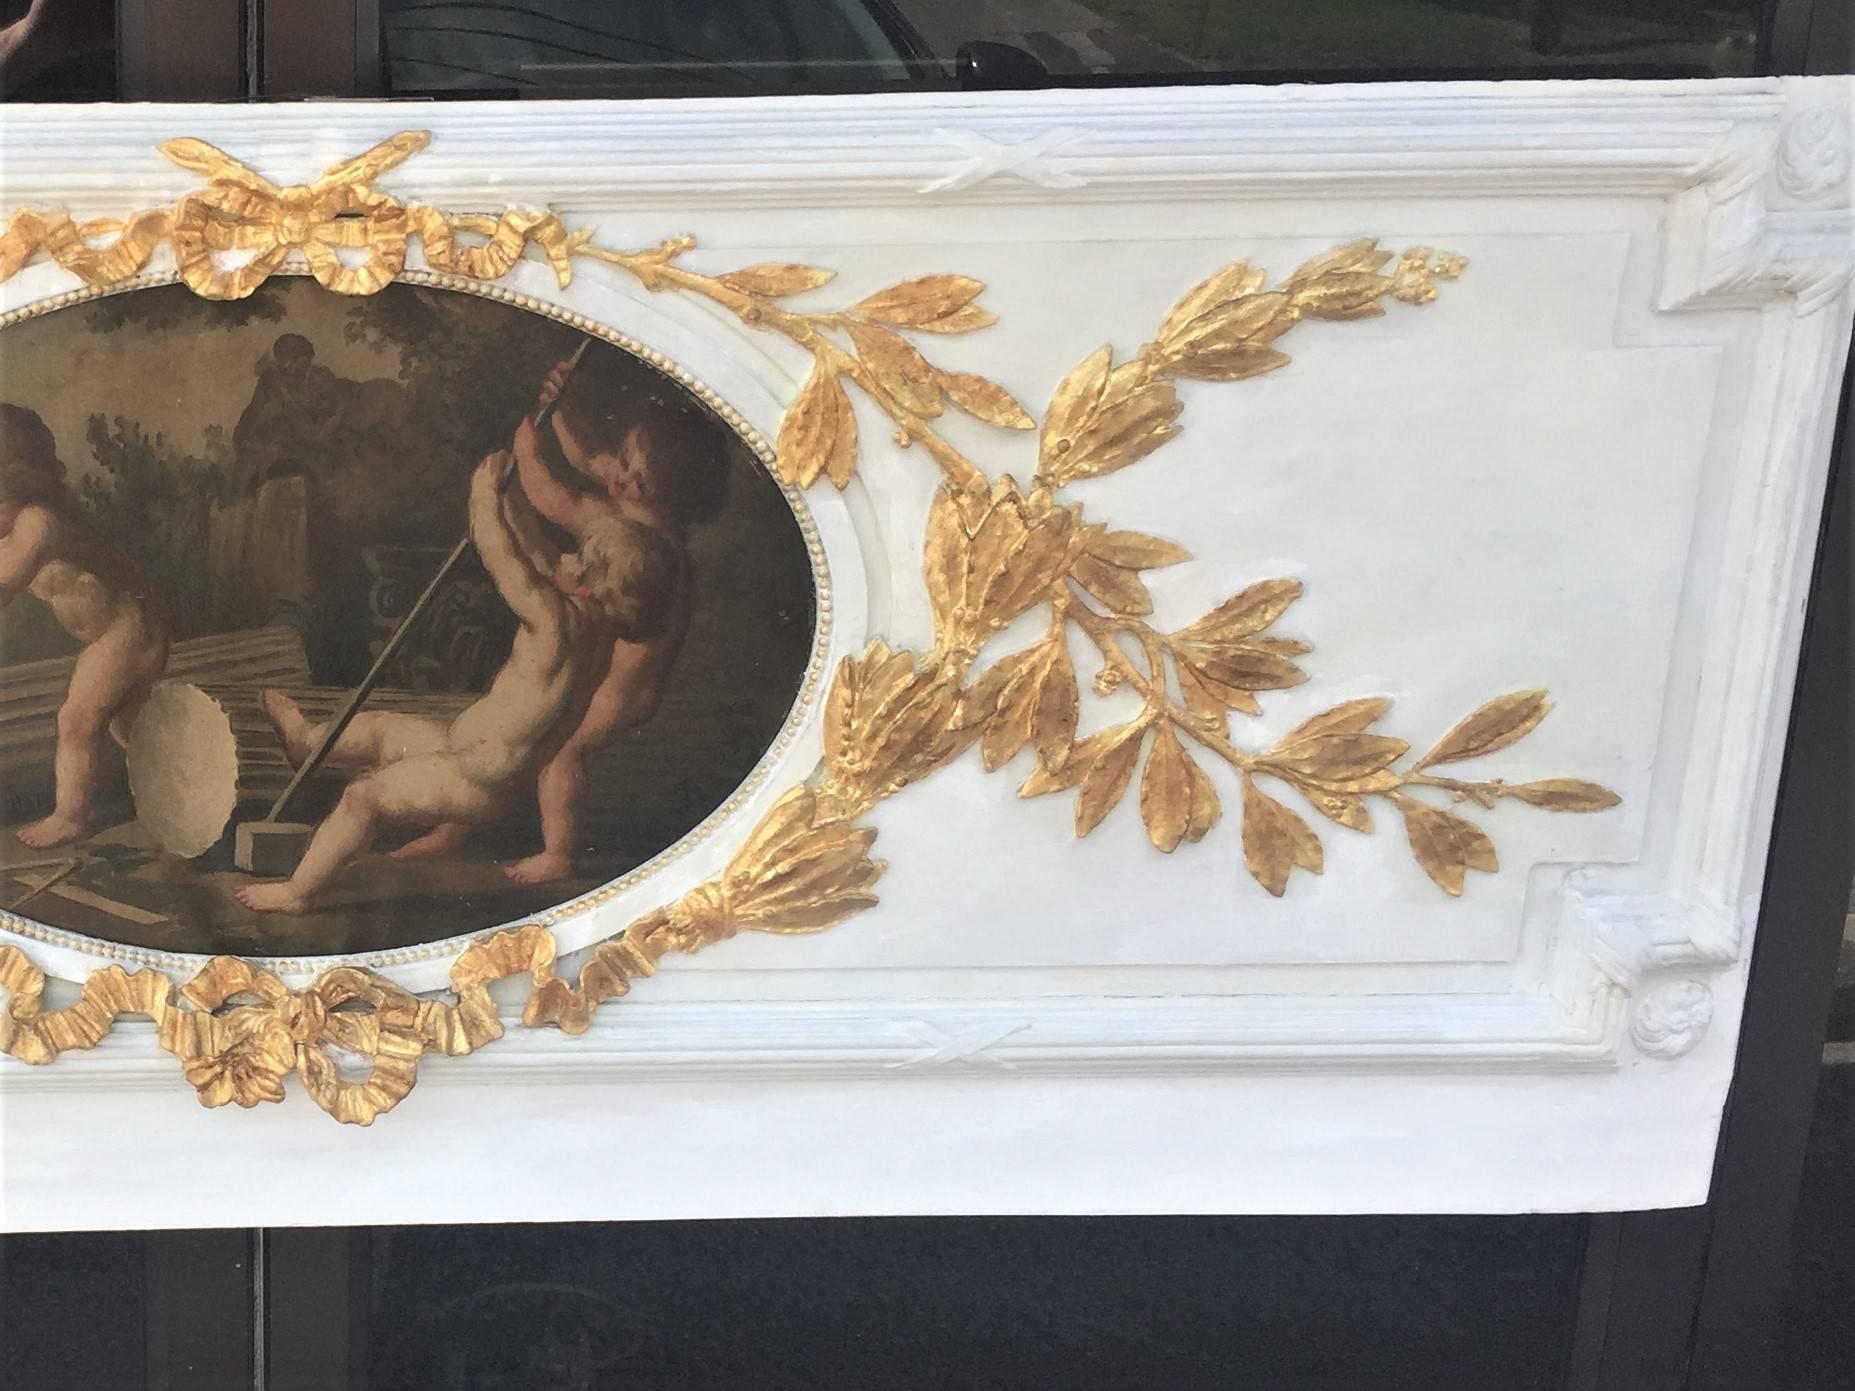 Louis XVI Carved Giltwood and Painted Boiserie Overdoor Frieze Panel with Cherubs Inset